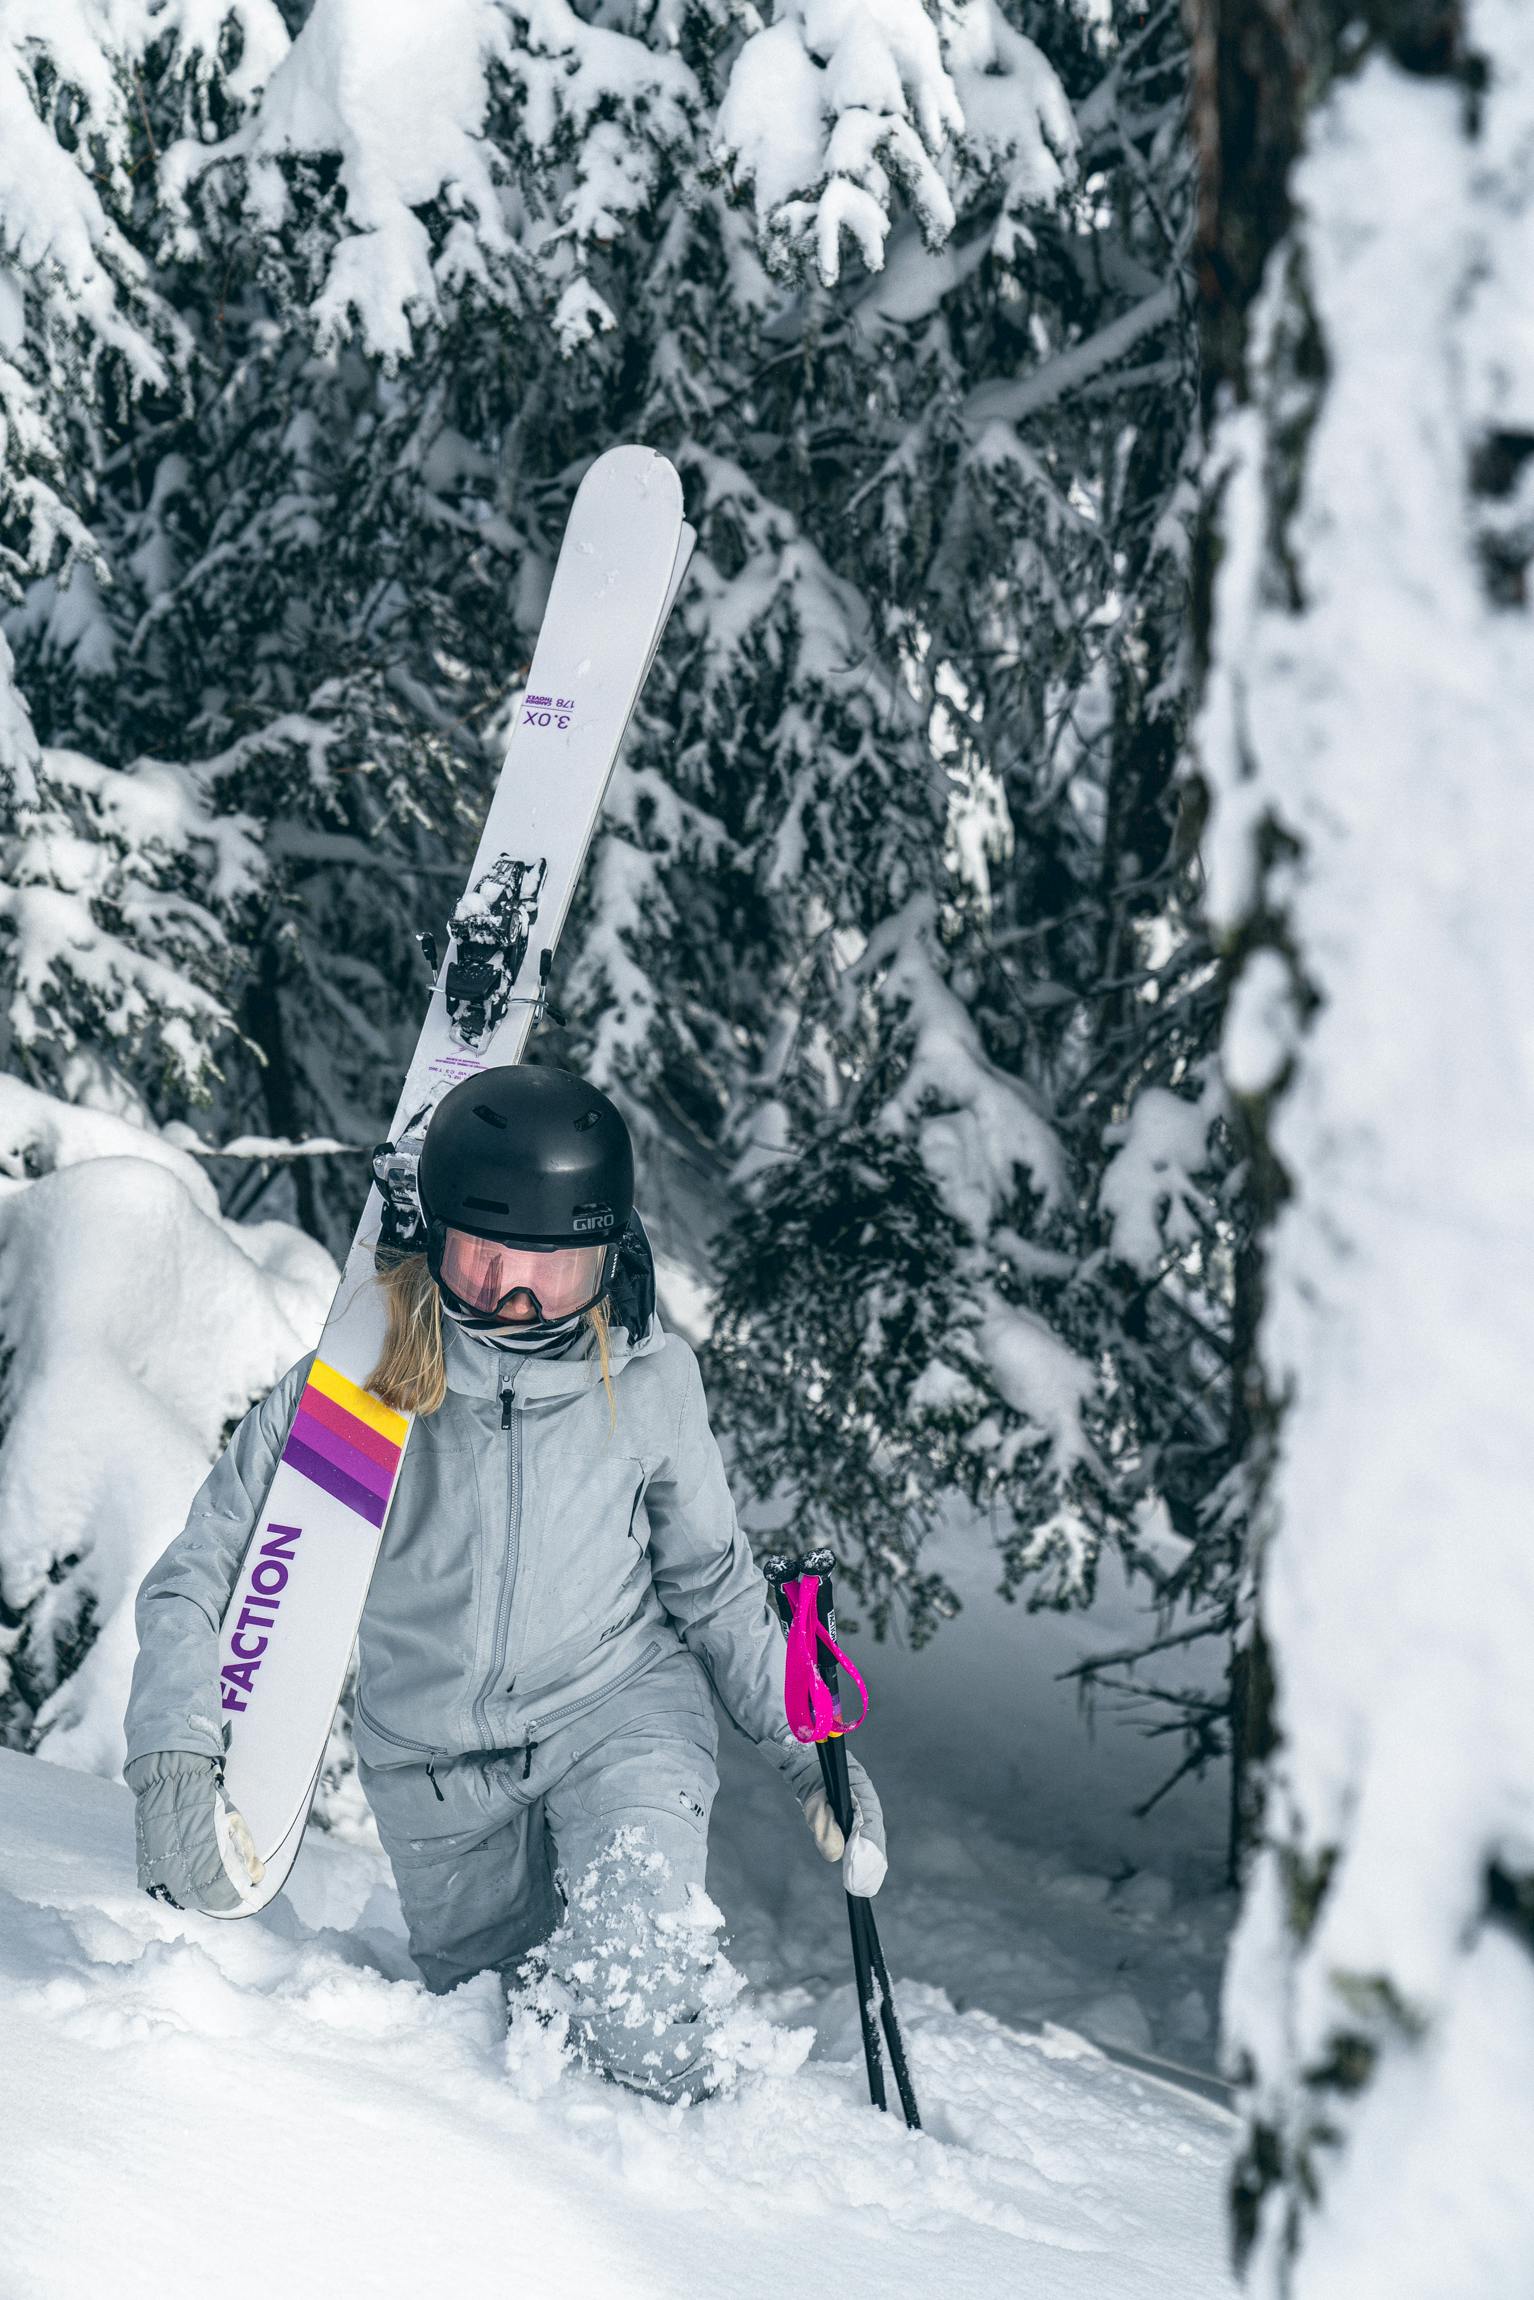 A woman carrying Faction skis and hiking up a slope in knee-deep snow